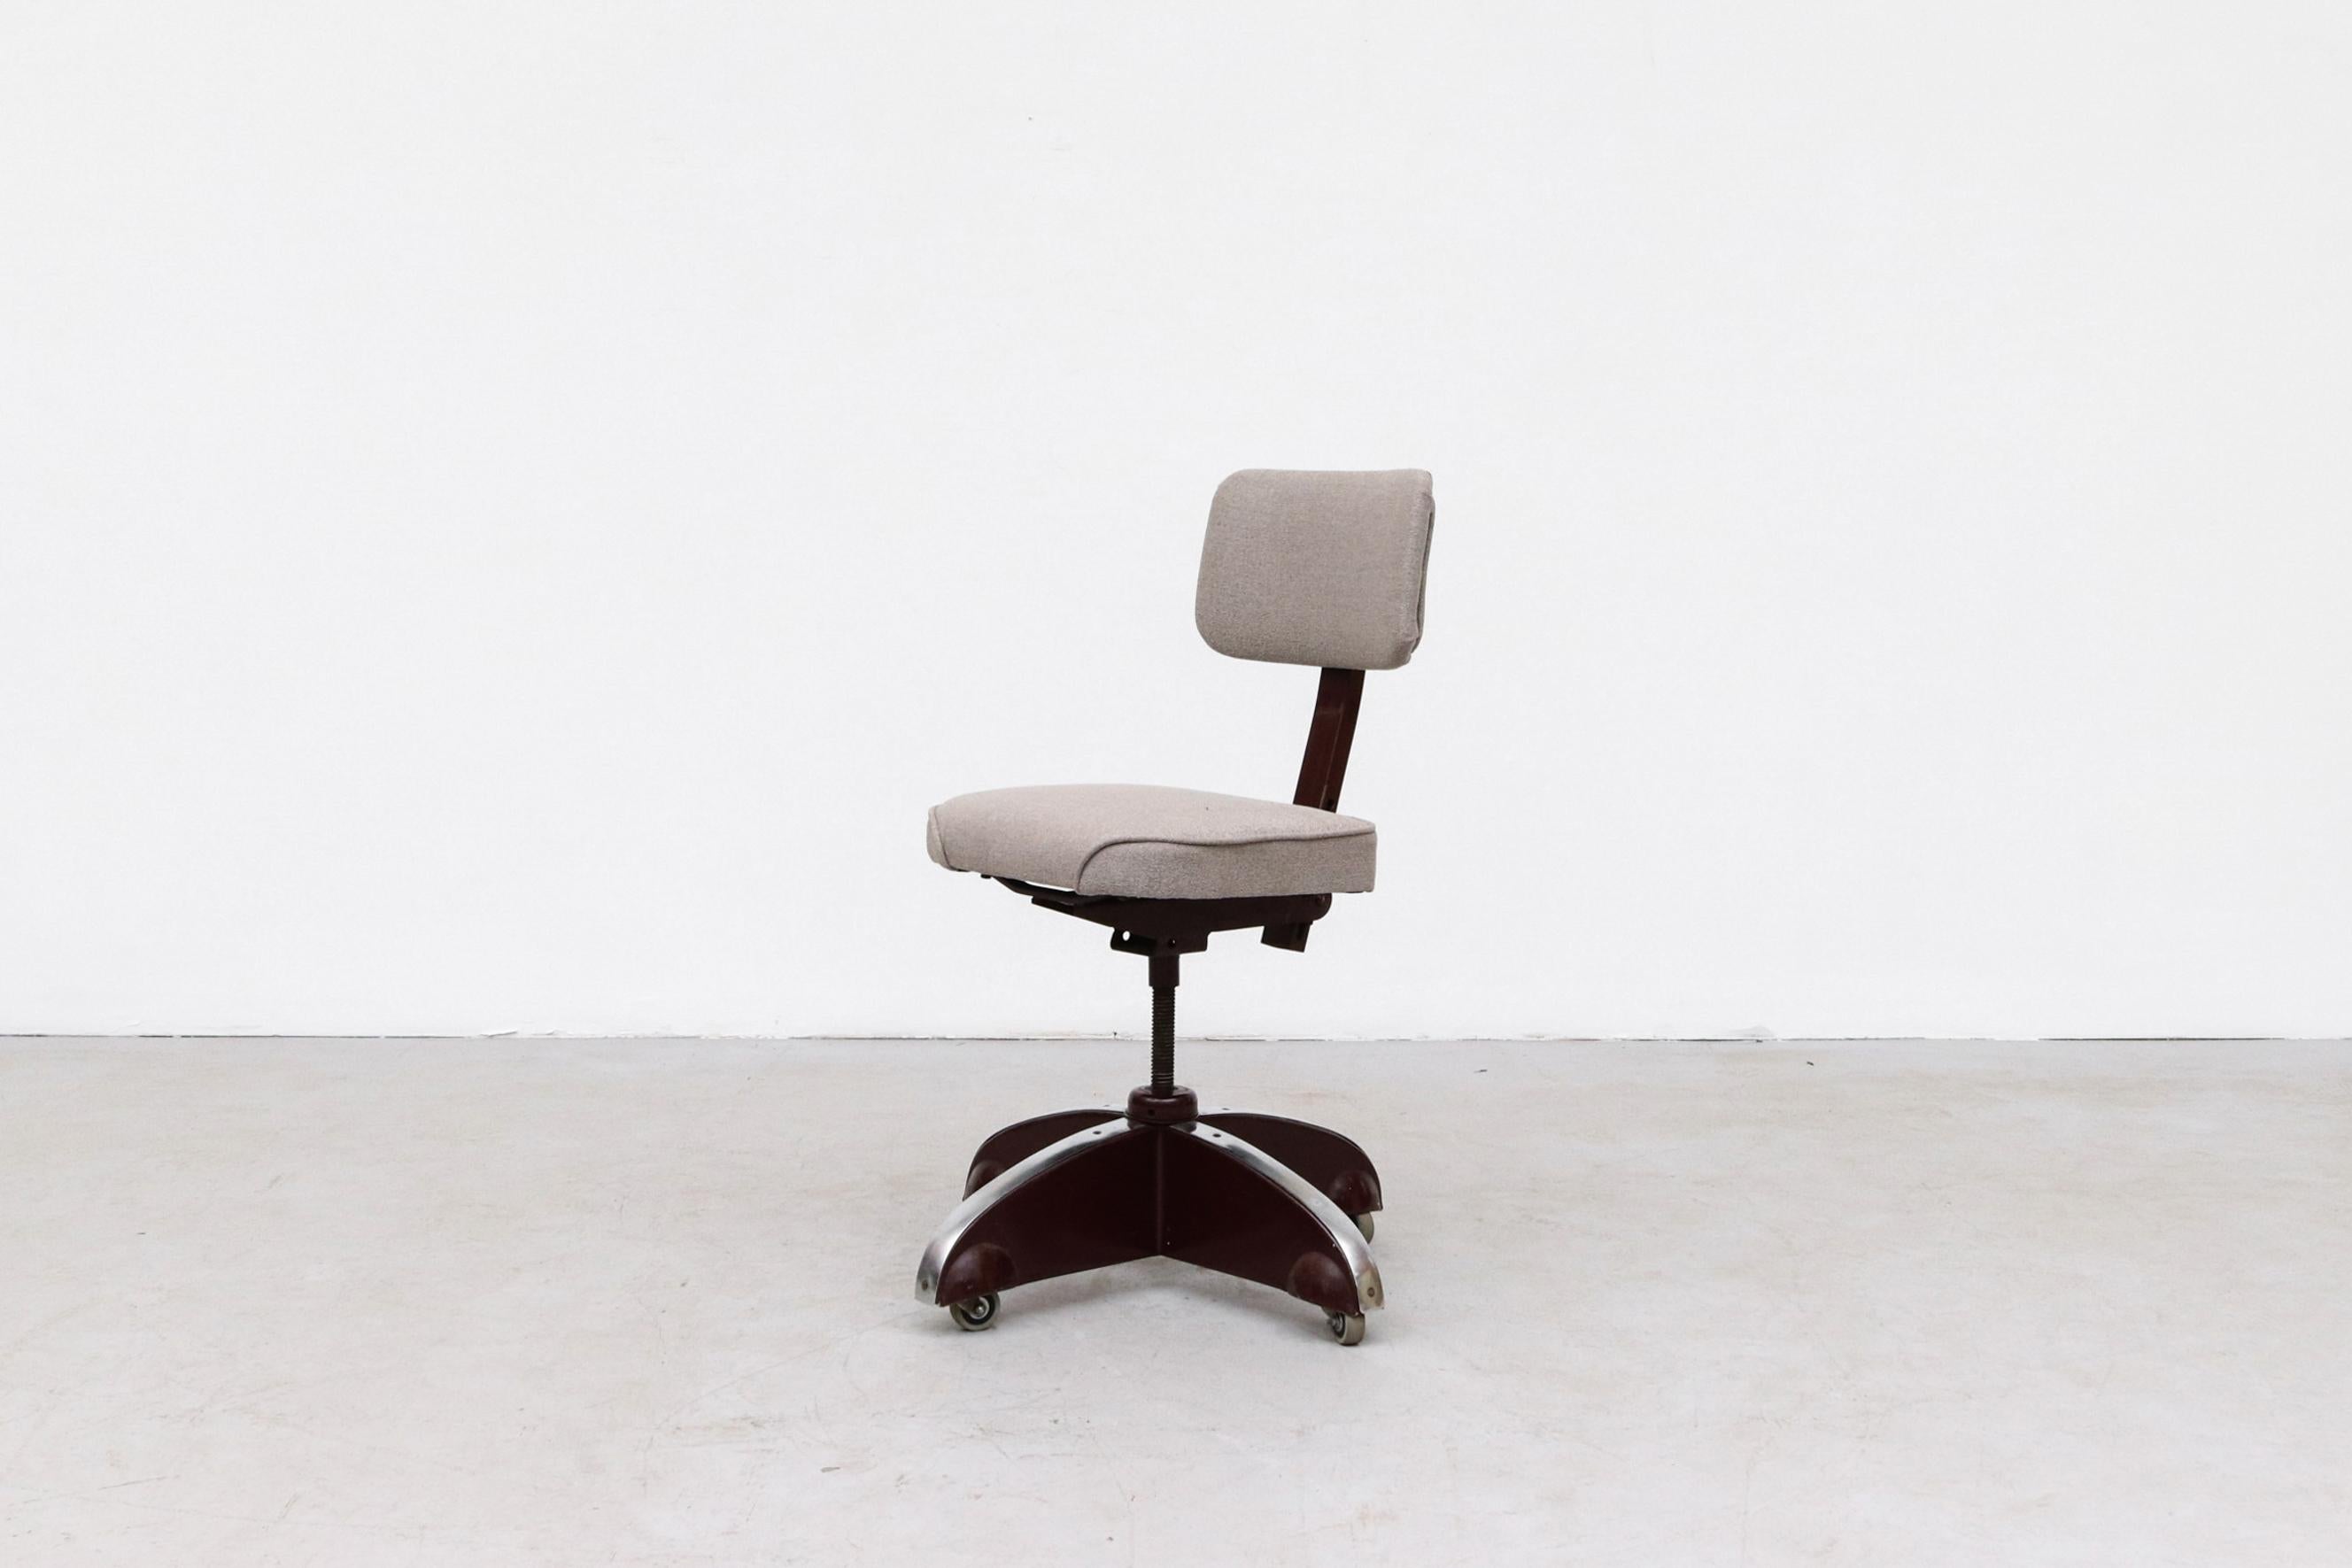 Ahrend De Cirkel Rolling Office Chair. Newly upholstered grey seat, frame in original condition with visible wear, consistent with age and use. Seat spins to adjust height.